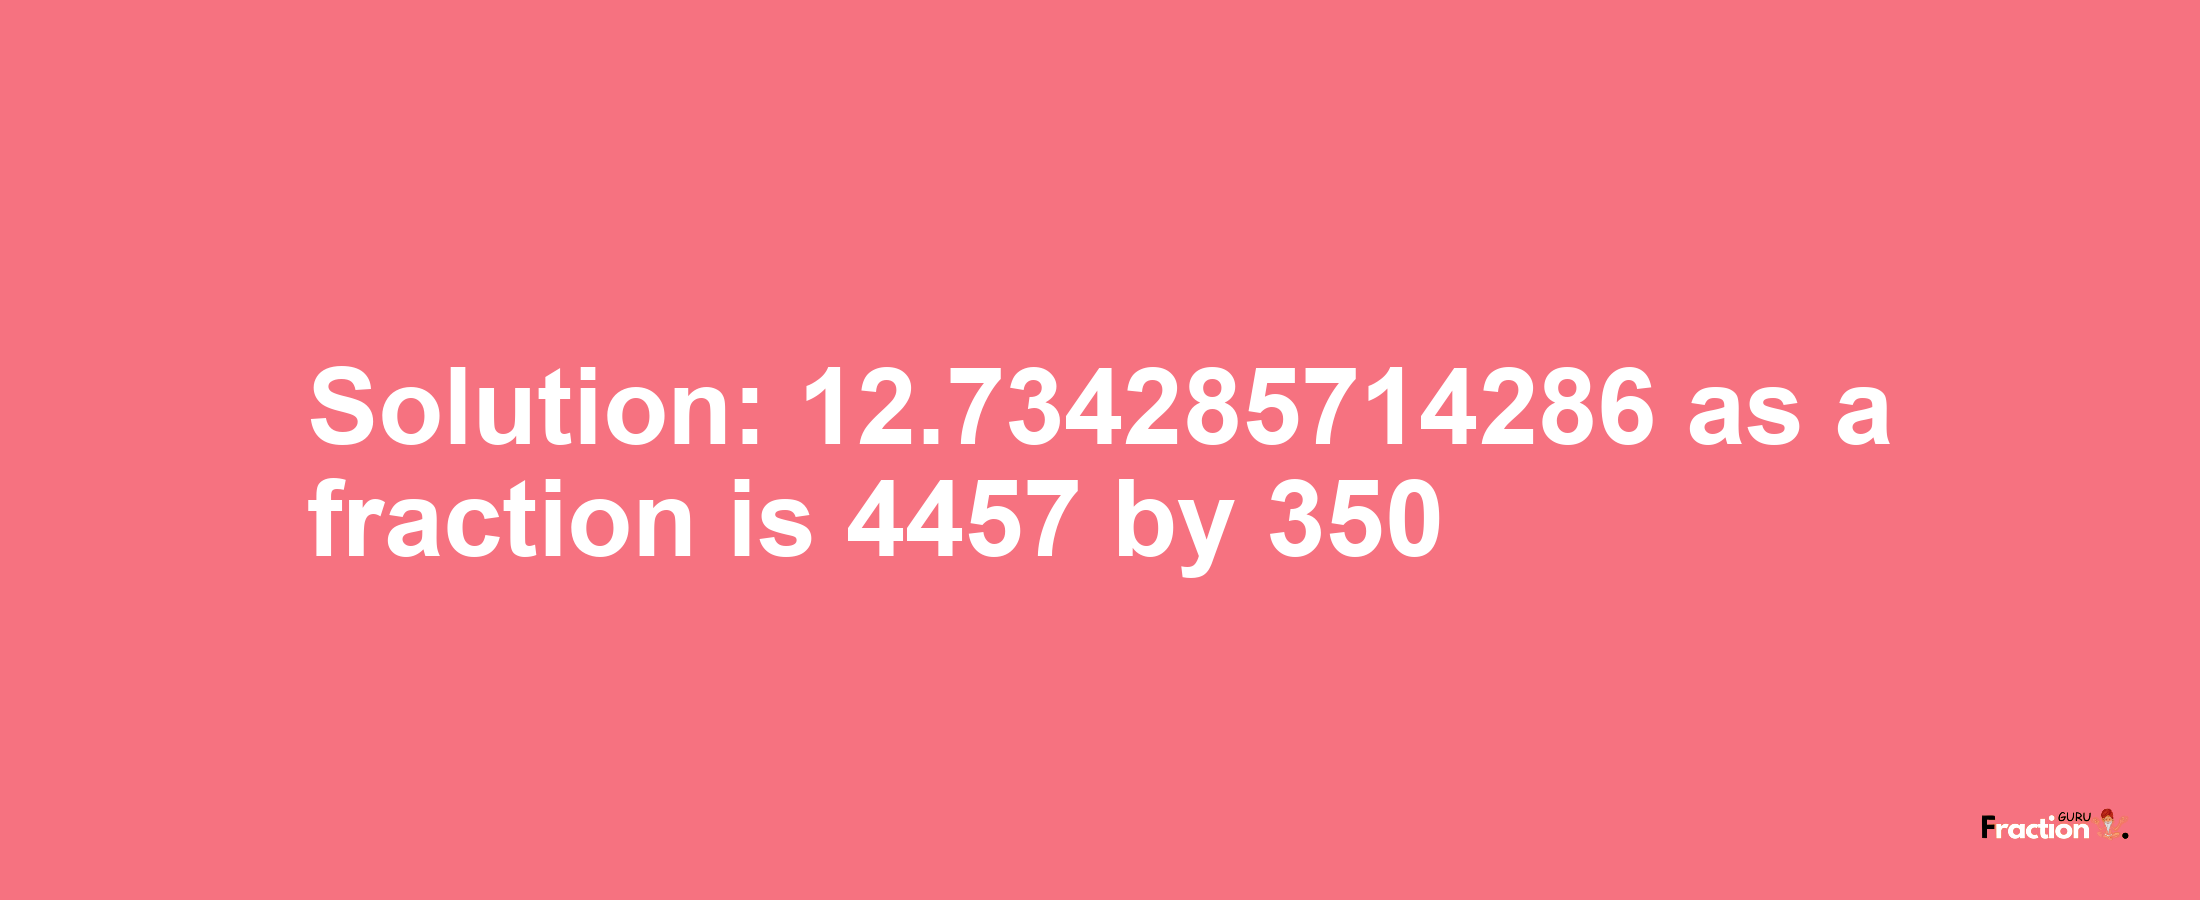 Solution:12.734285714286 as a fraction is 4457/350